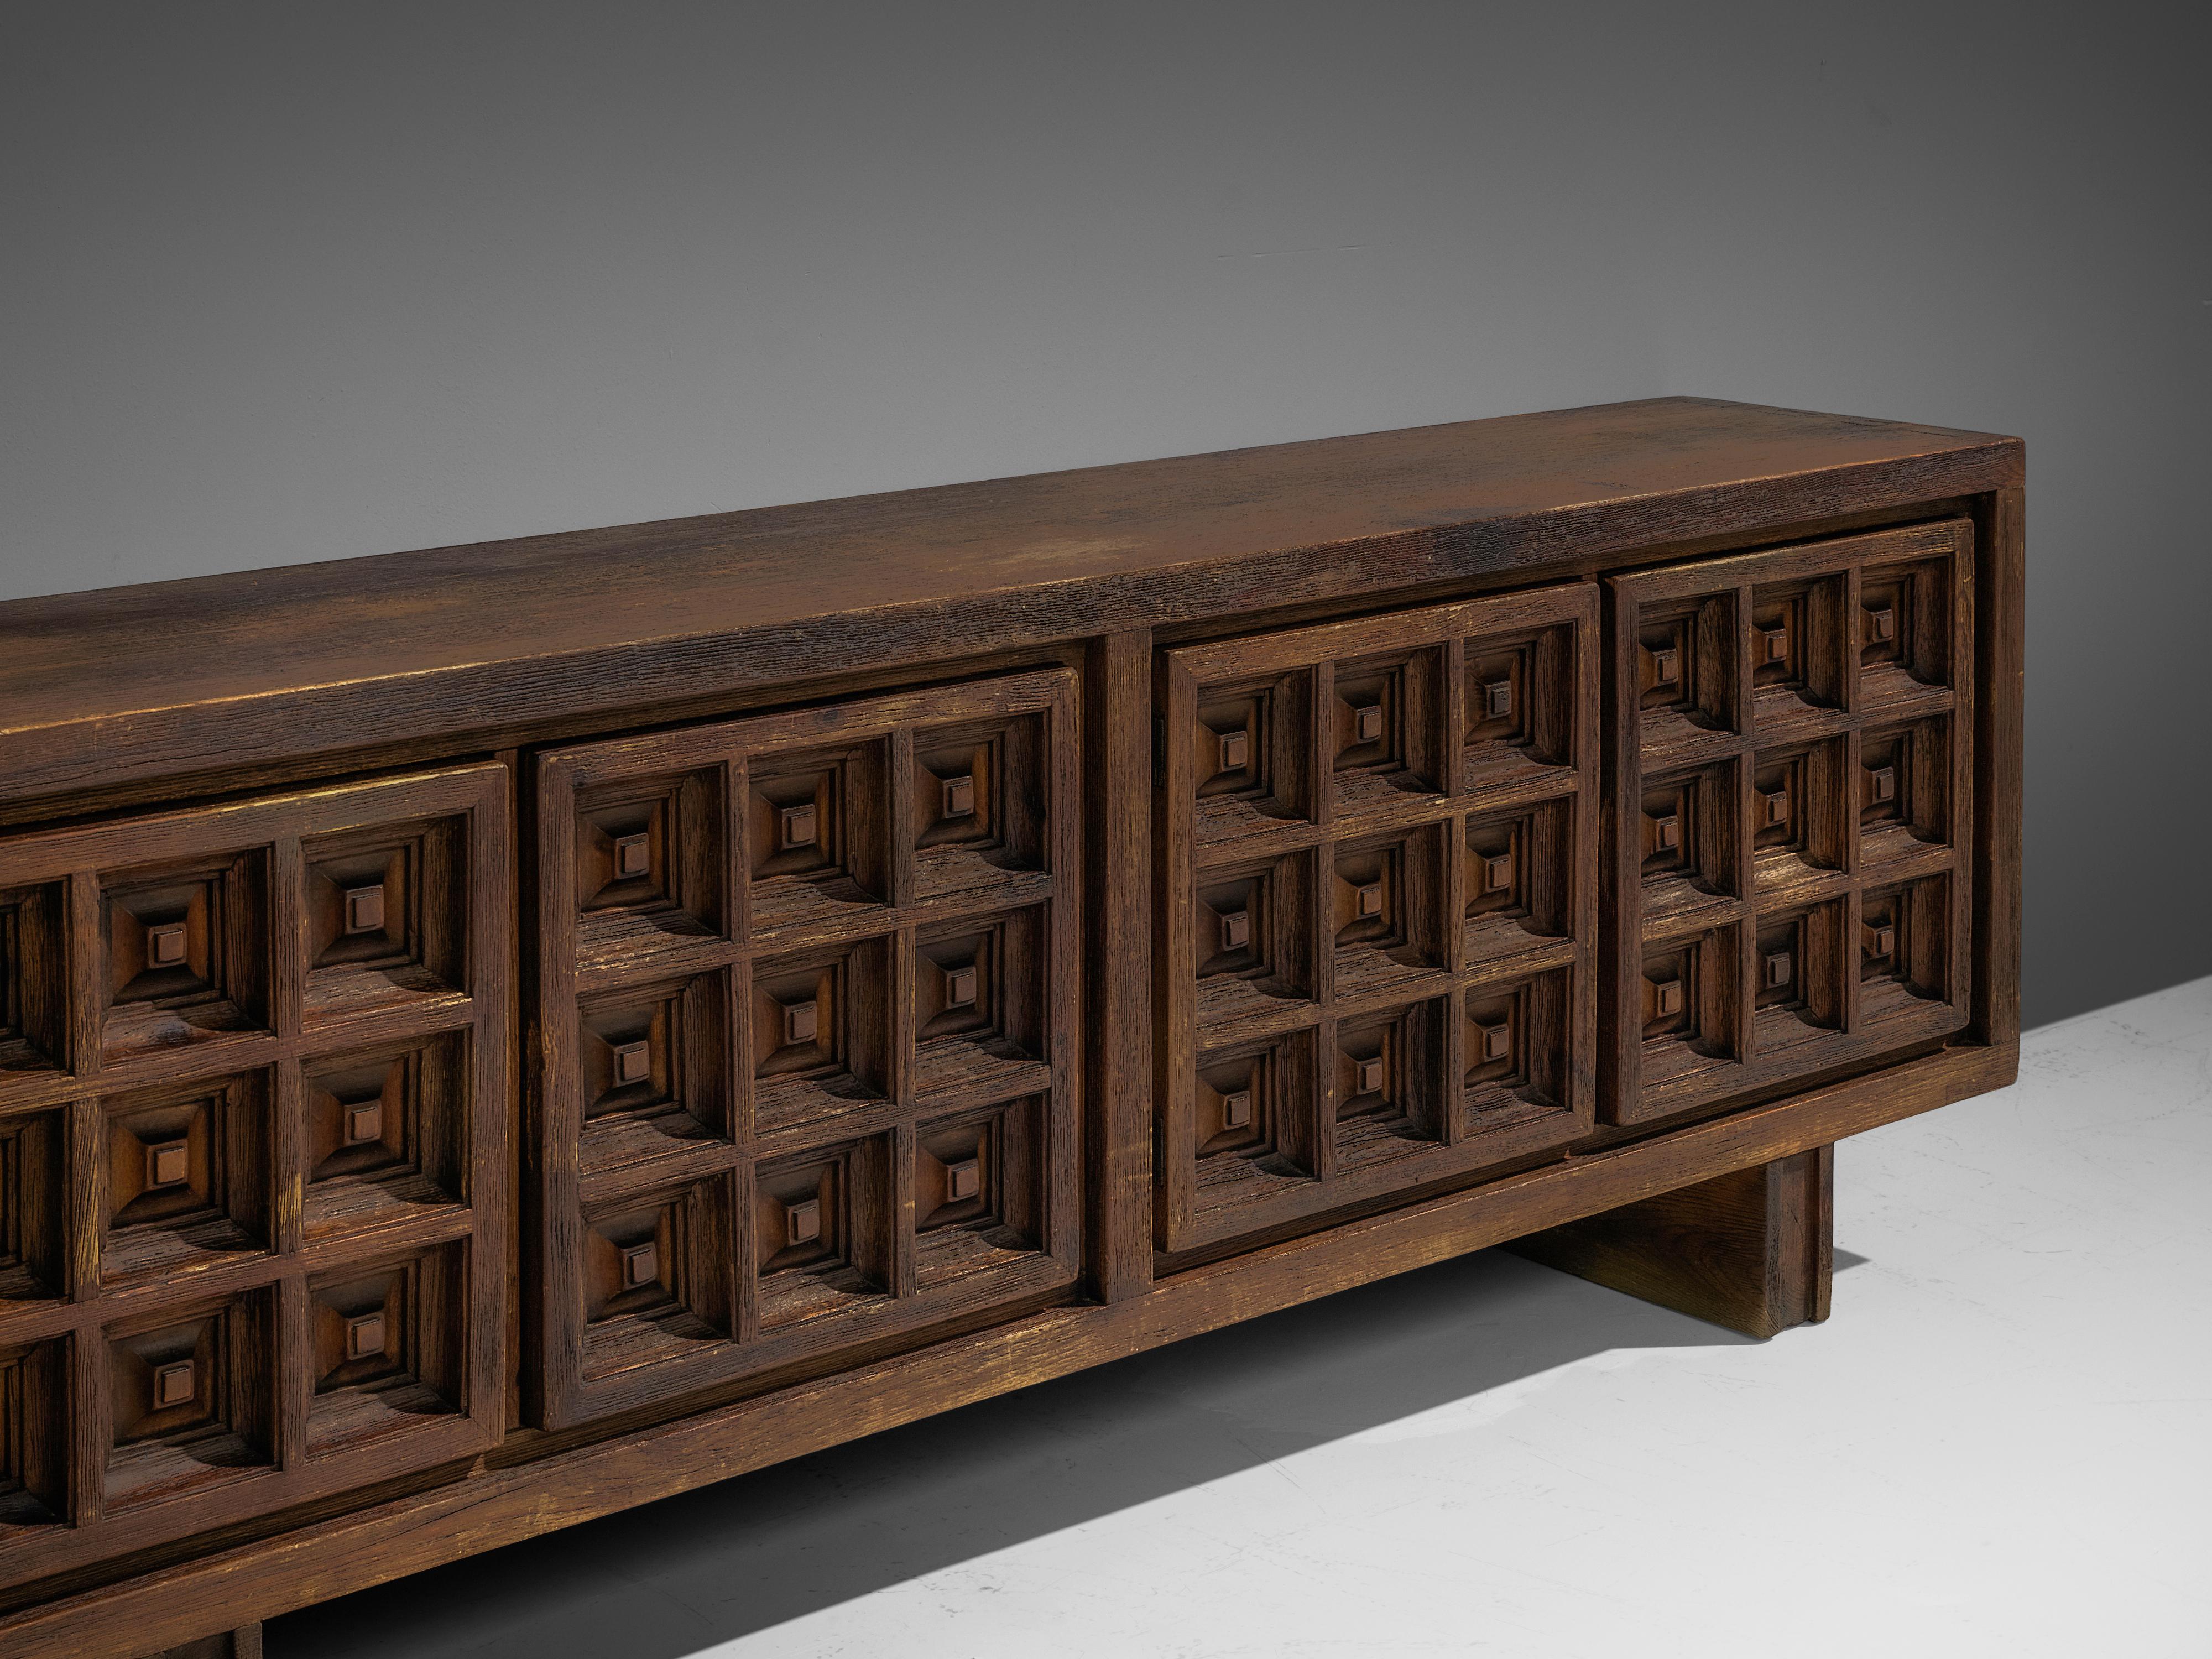 Spanish Sideboard in Stained Pine Manufactured by Biosca 1